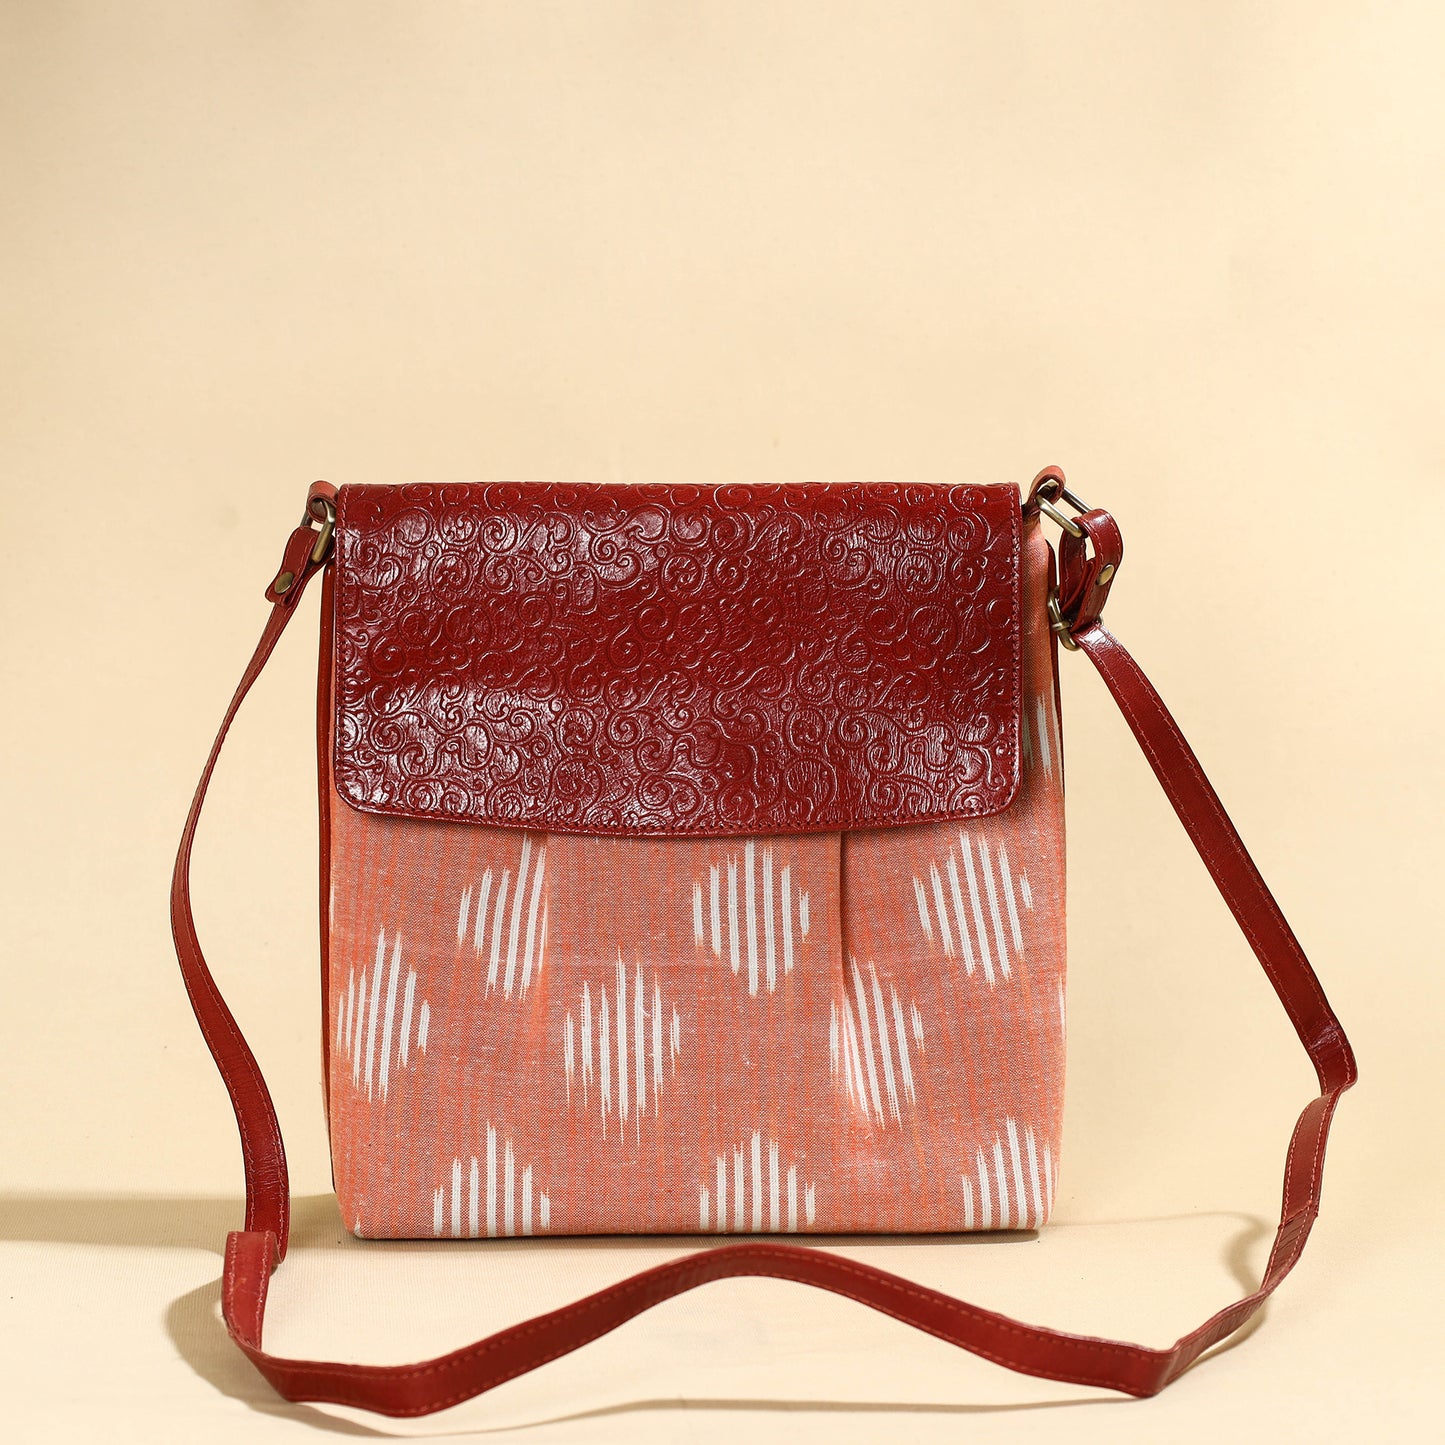 Peach - Handcrafted Ikat Fabric Sling Bag with Embossed Leather Flap